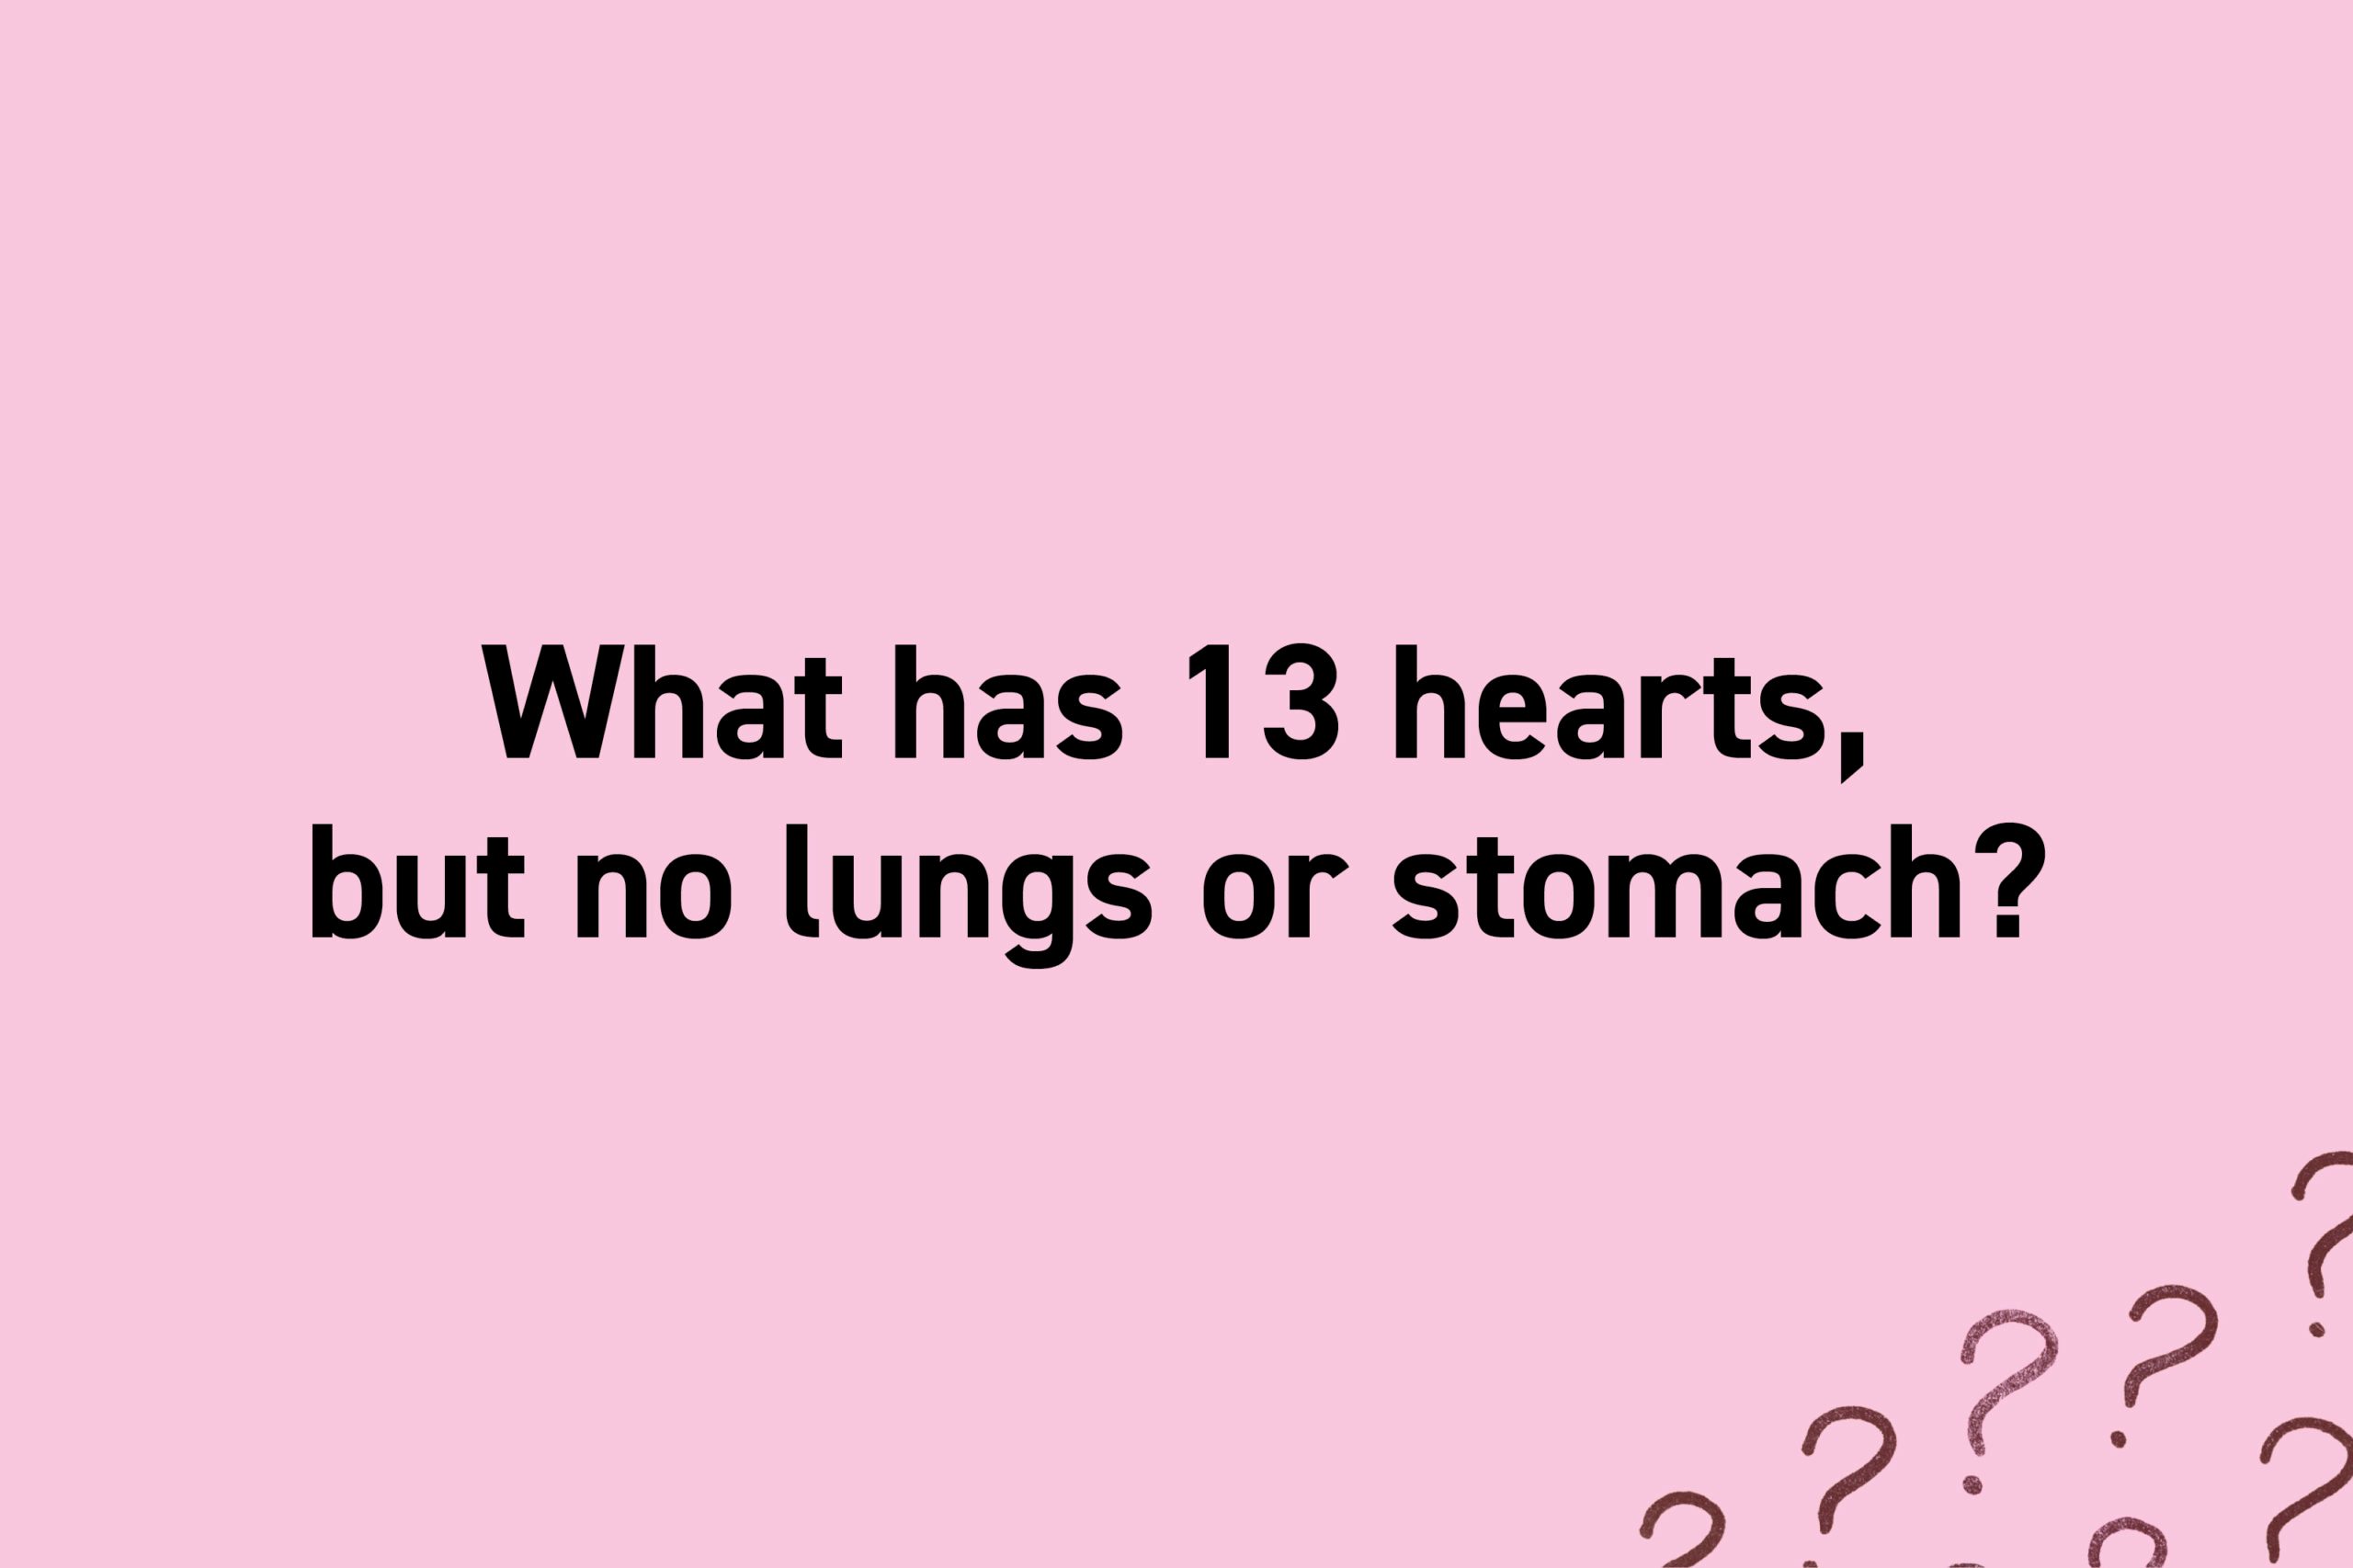 What has 13 hearts, but no lungs or stomach?